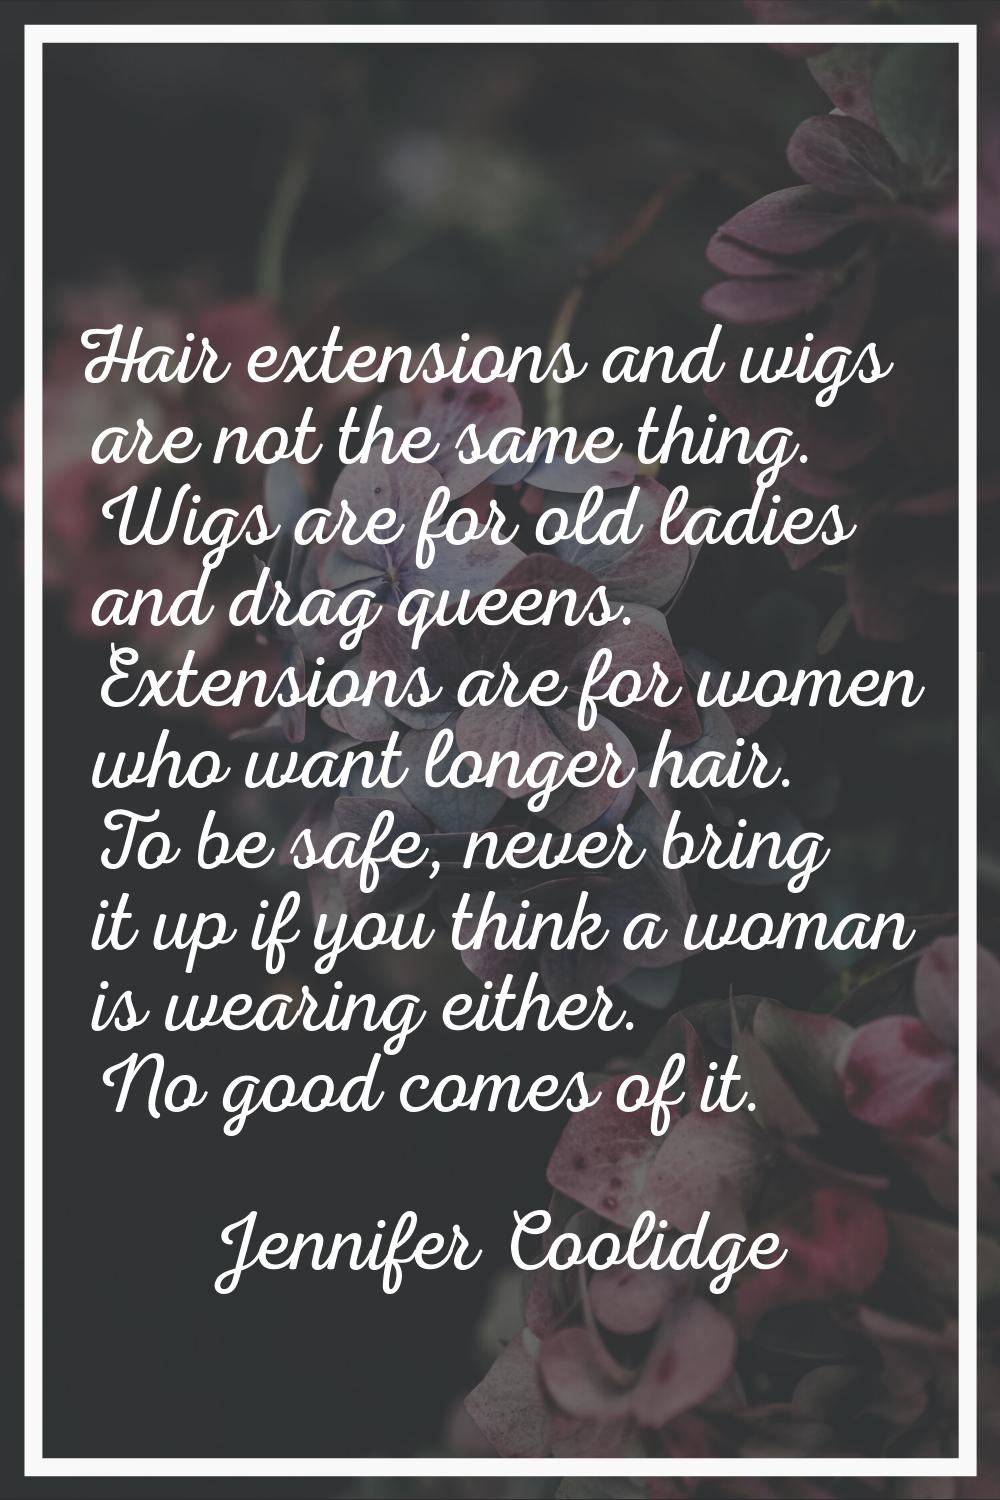 Hair extensions and wigs are not the same thing. Wigs are for old ladies and drag queens. Extension